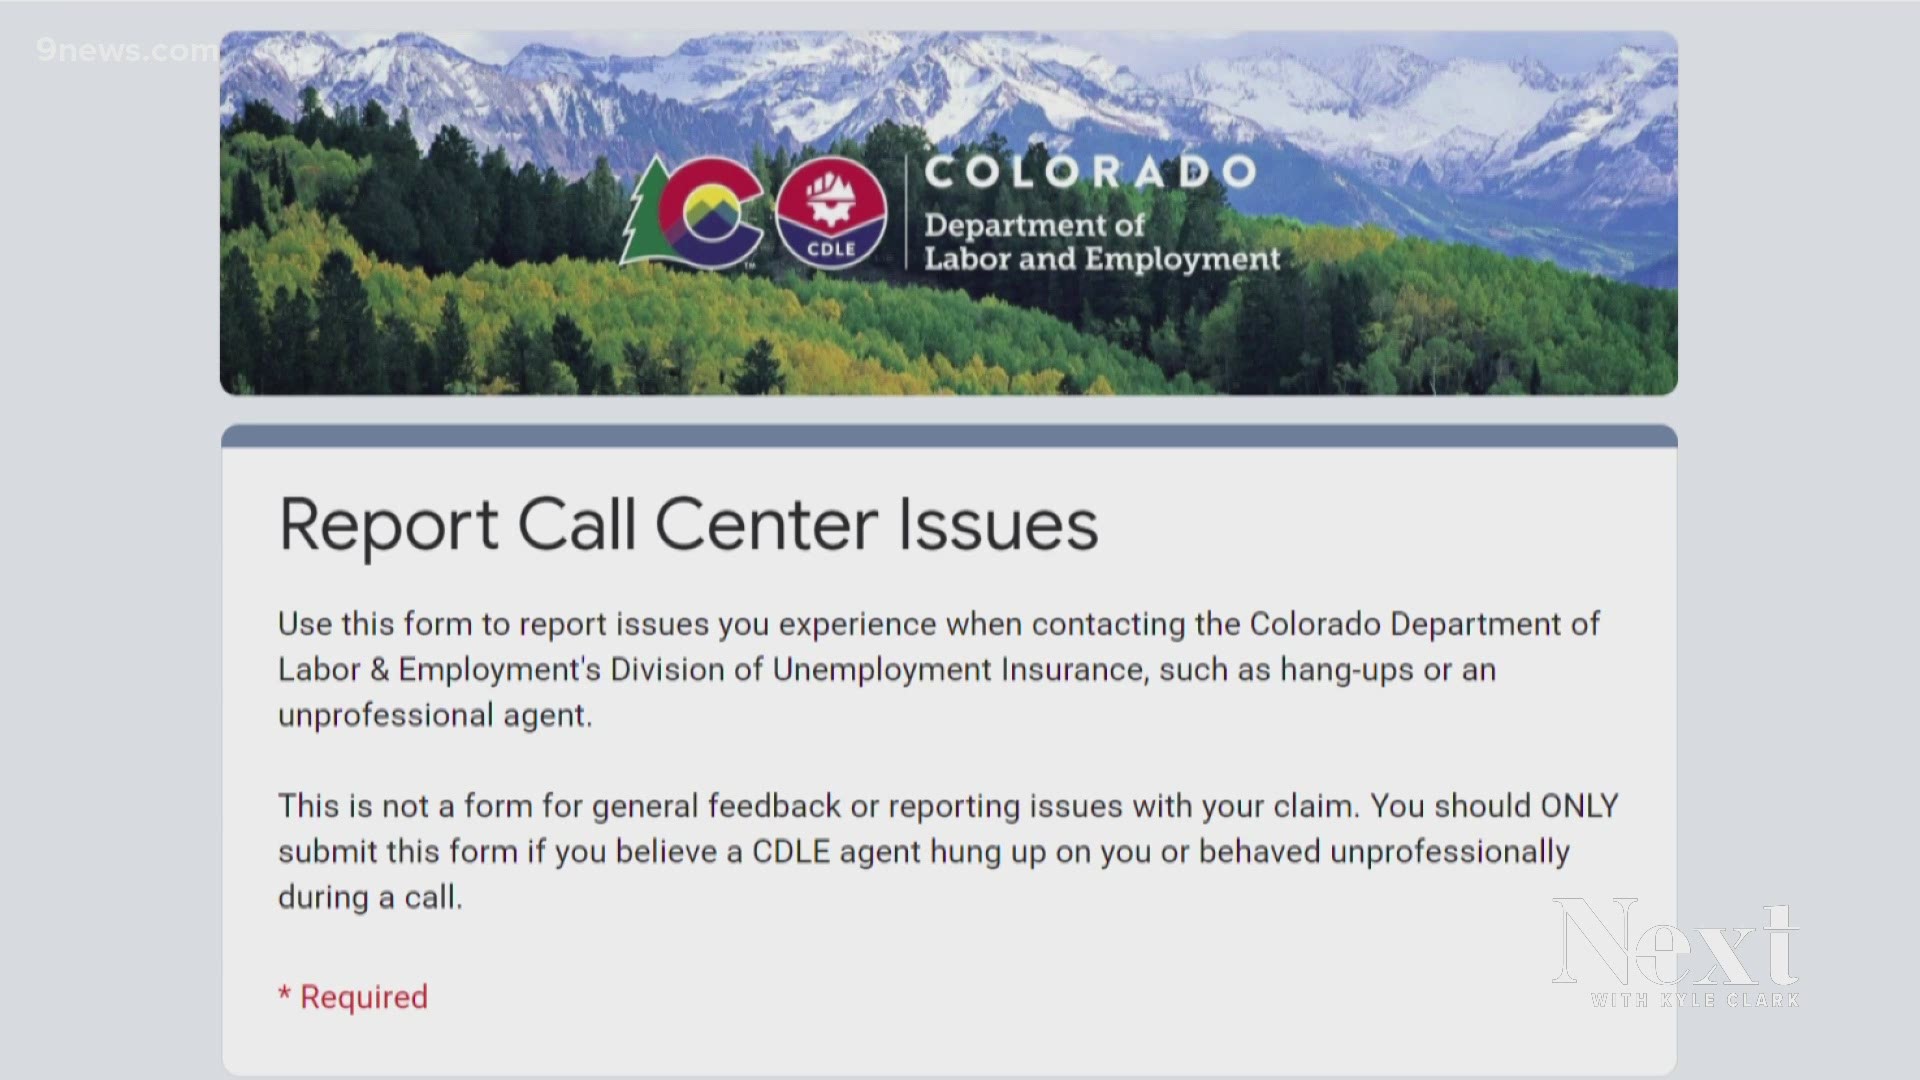 The Colorado Department of Labor and Employment (CDLE) hired a Florida-based call center in April to help with unemployment questions. But people have complaints.